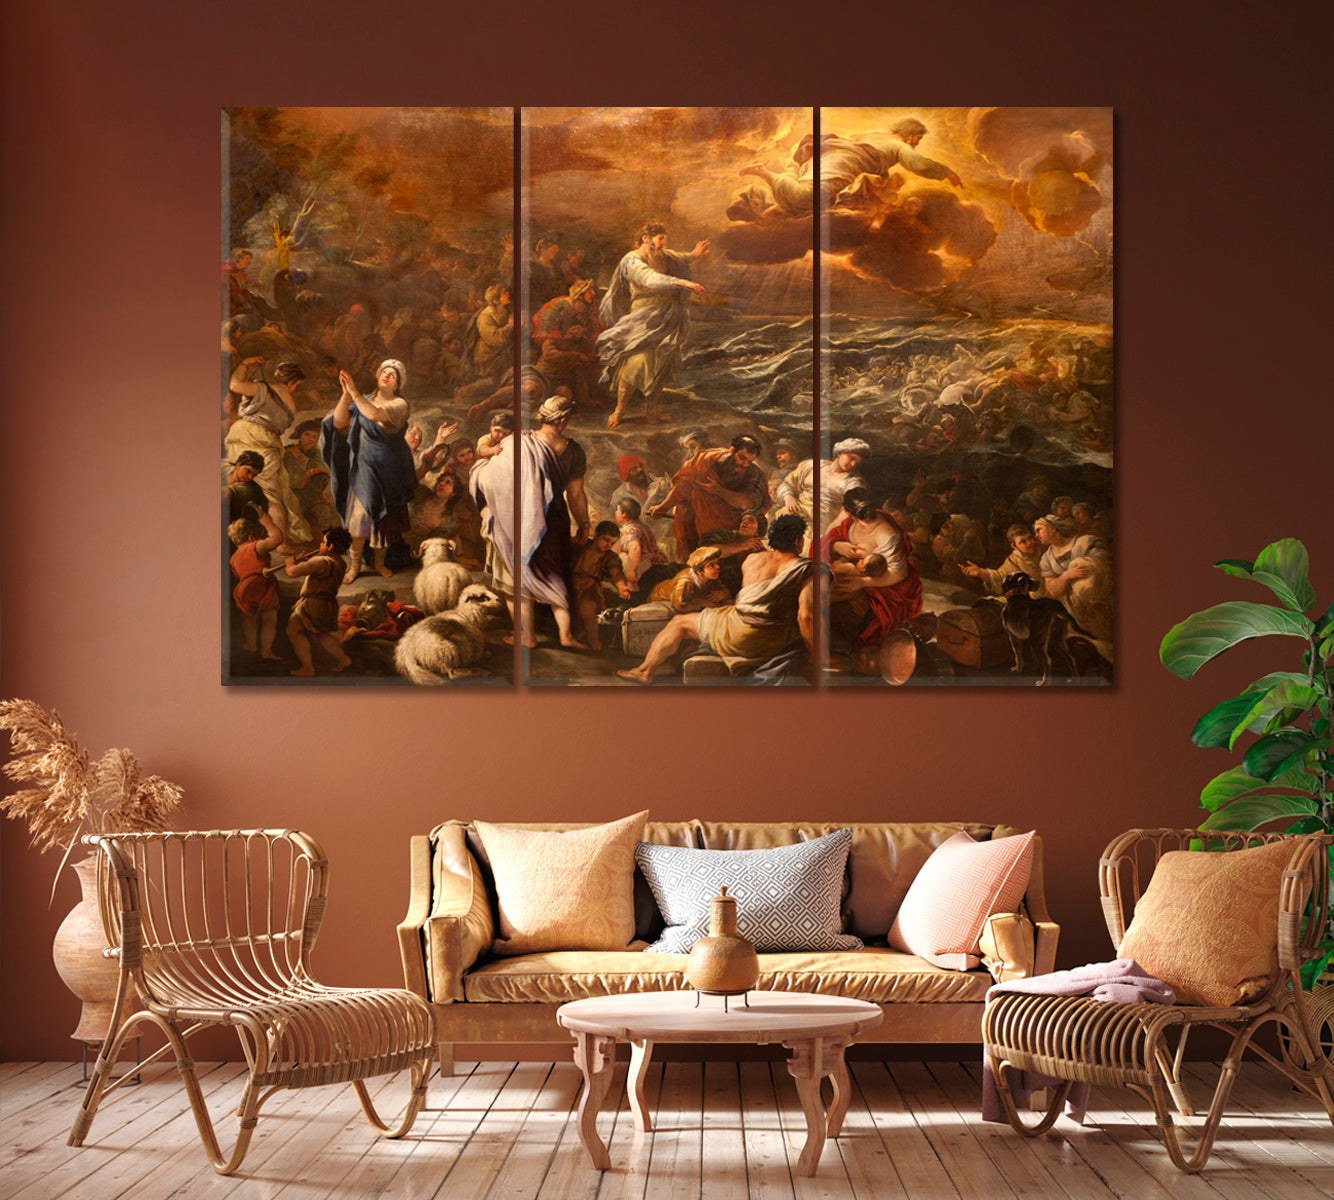 Crossing of the Red Sea Canvas Print ArtLexy 3 Panels 36"x24" inches 